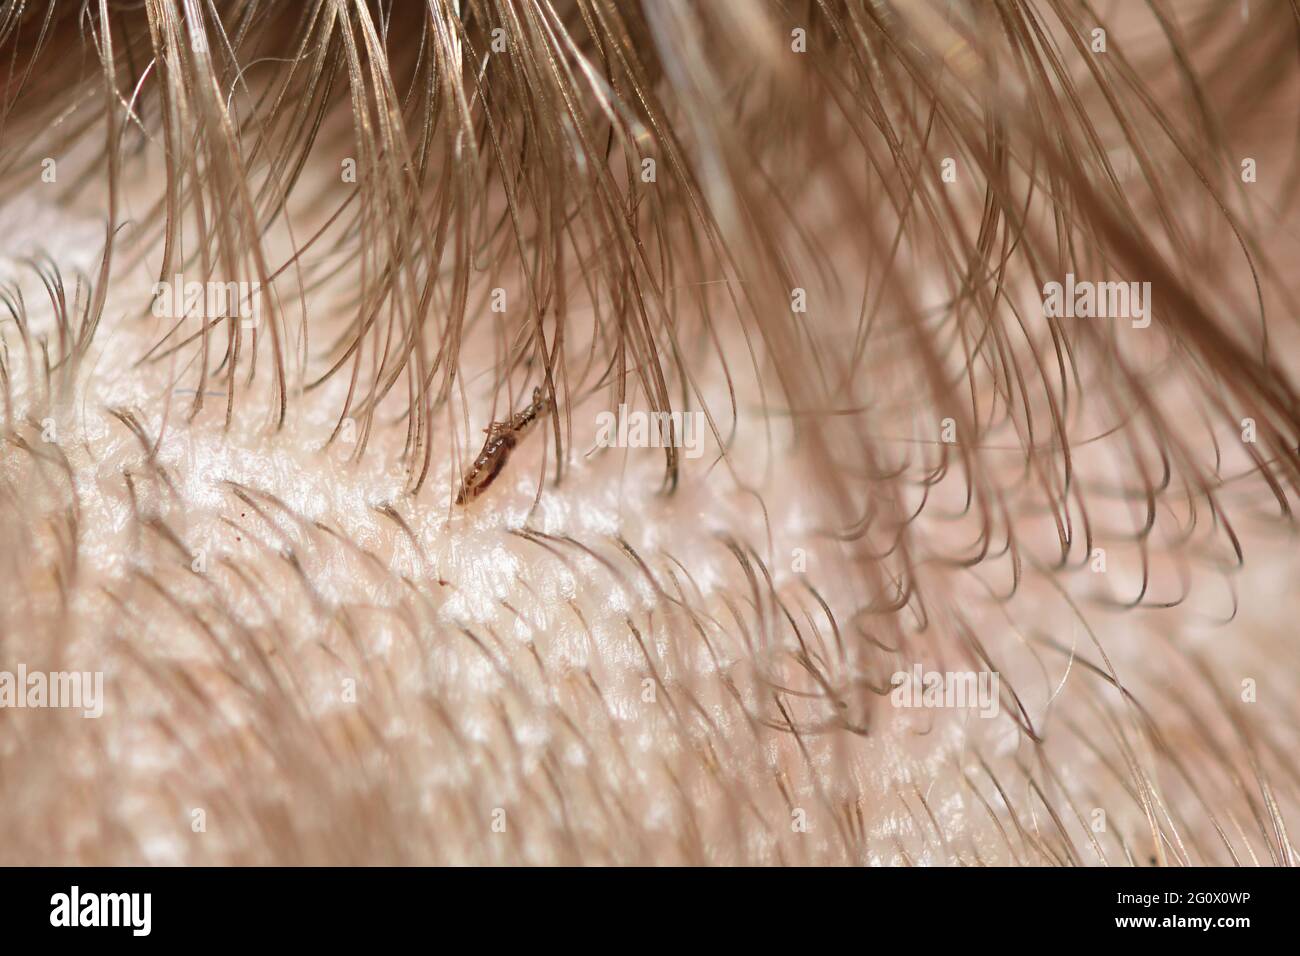 Dead lice in a child's hair after disinfection Stock Photo